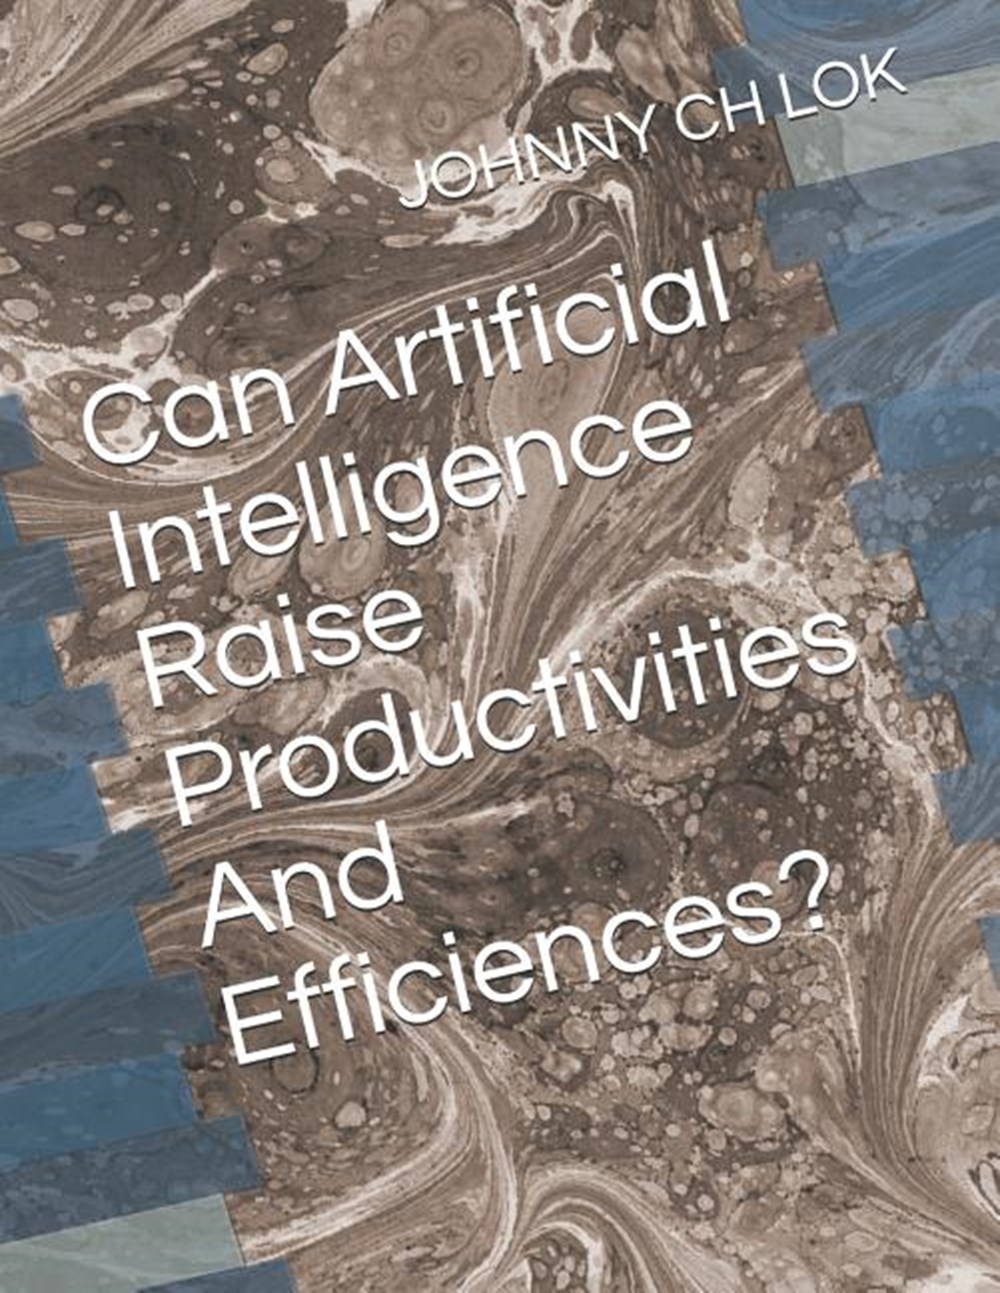 Can Artificial Intelligence Raise: Productivities And Efficiences?